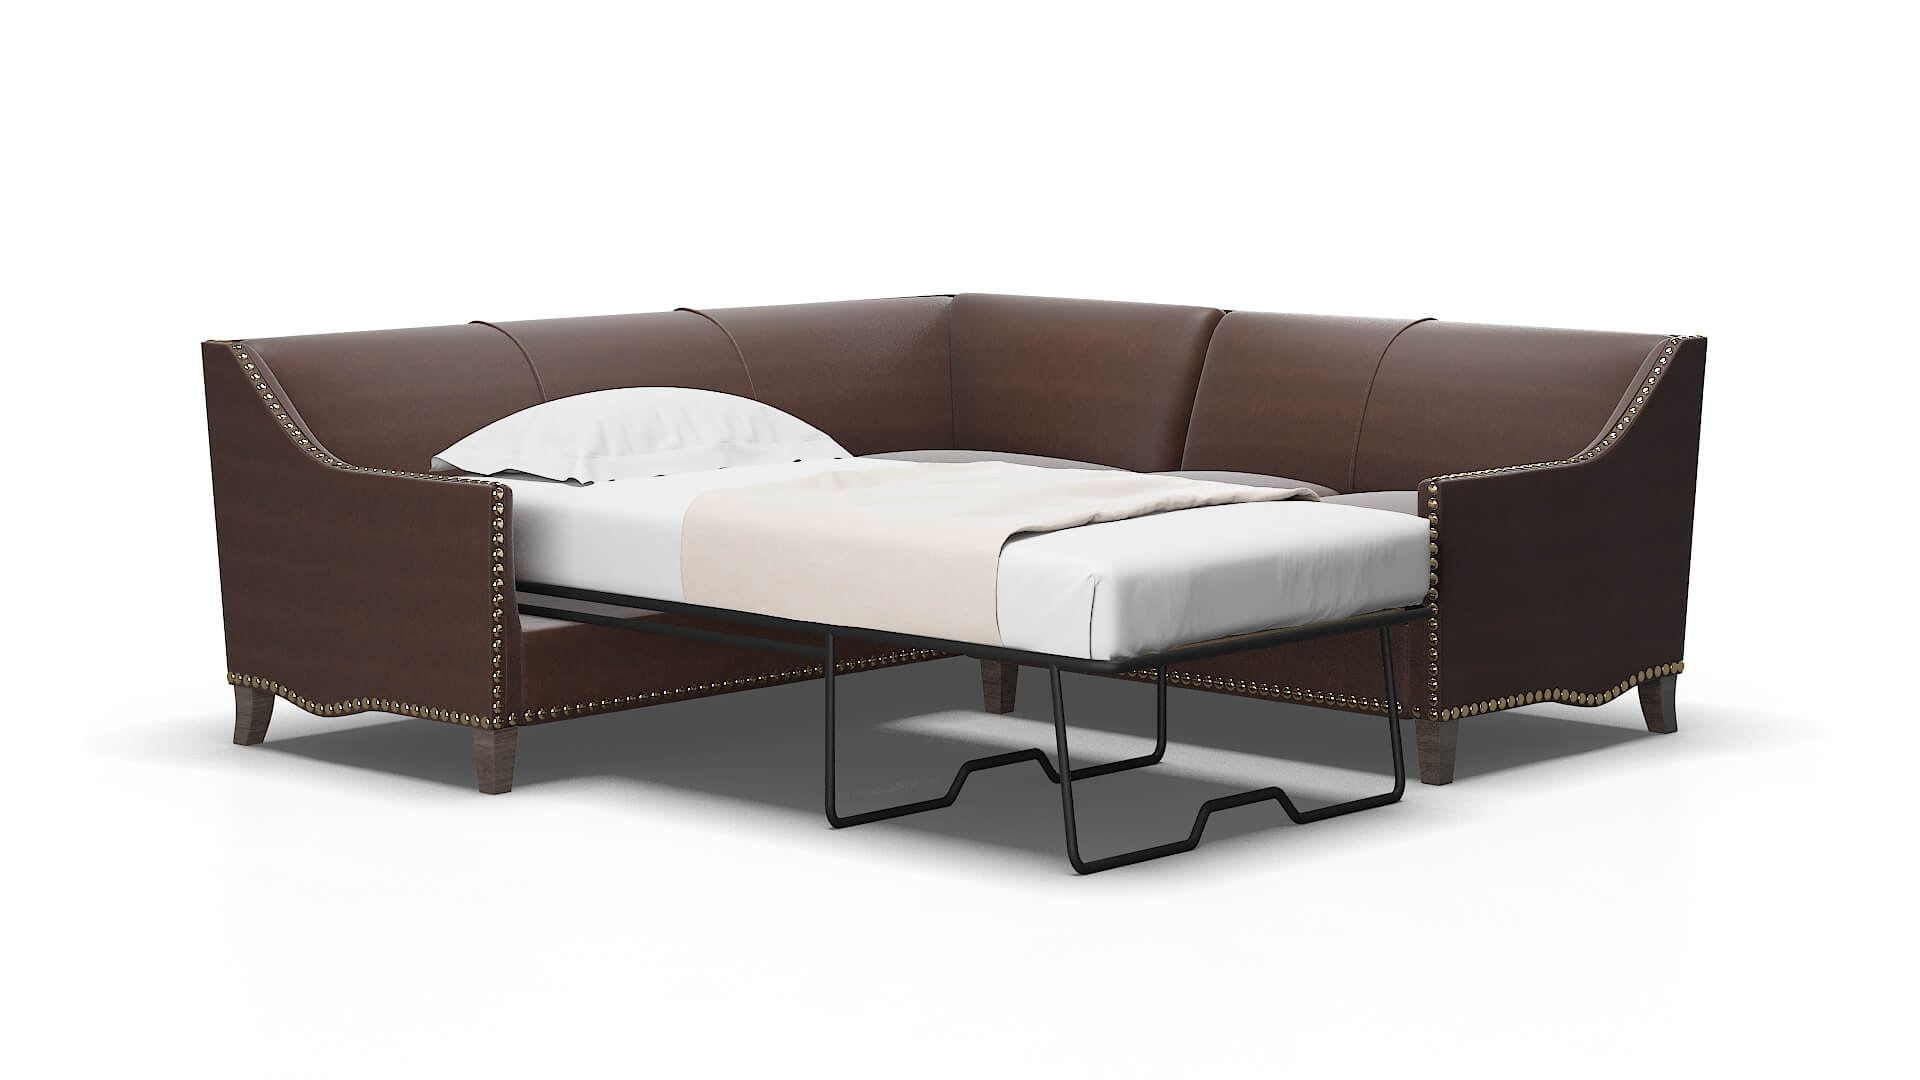 Amsterdam Insight Cafe Sectional Sleeper 2